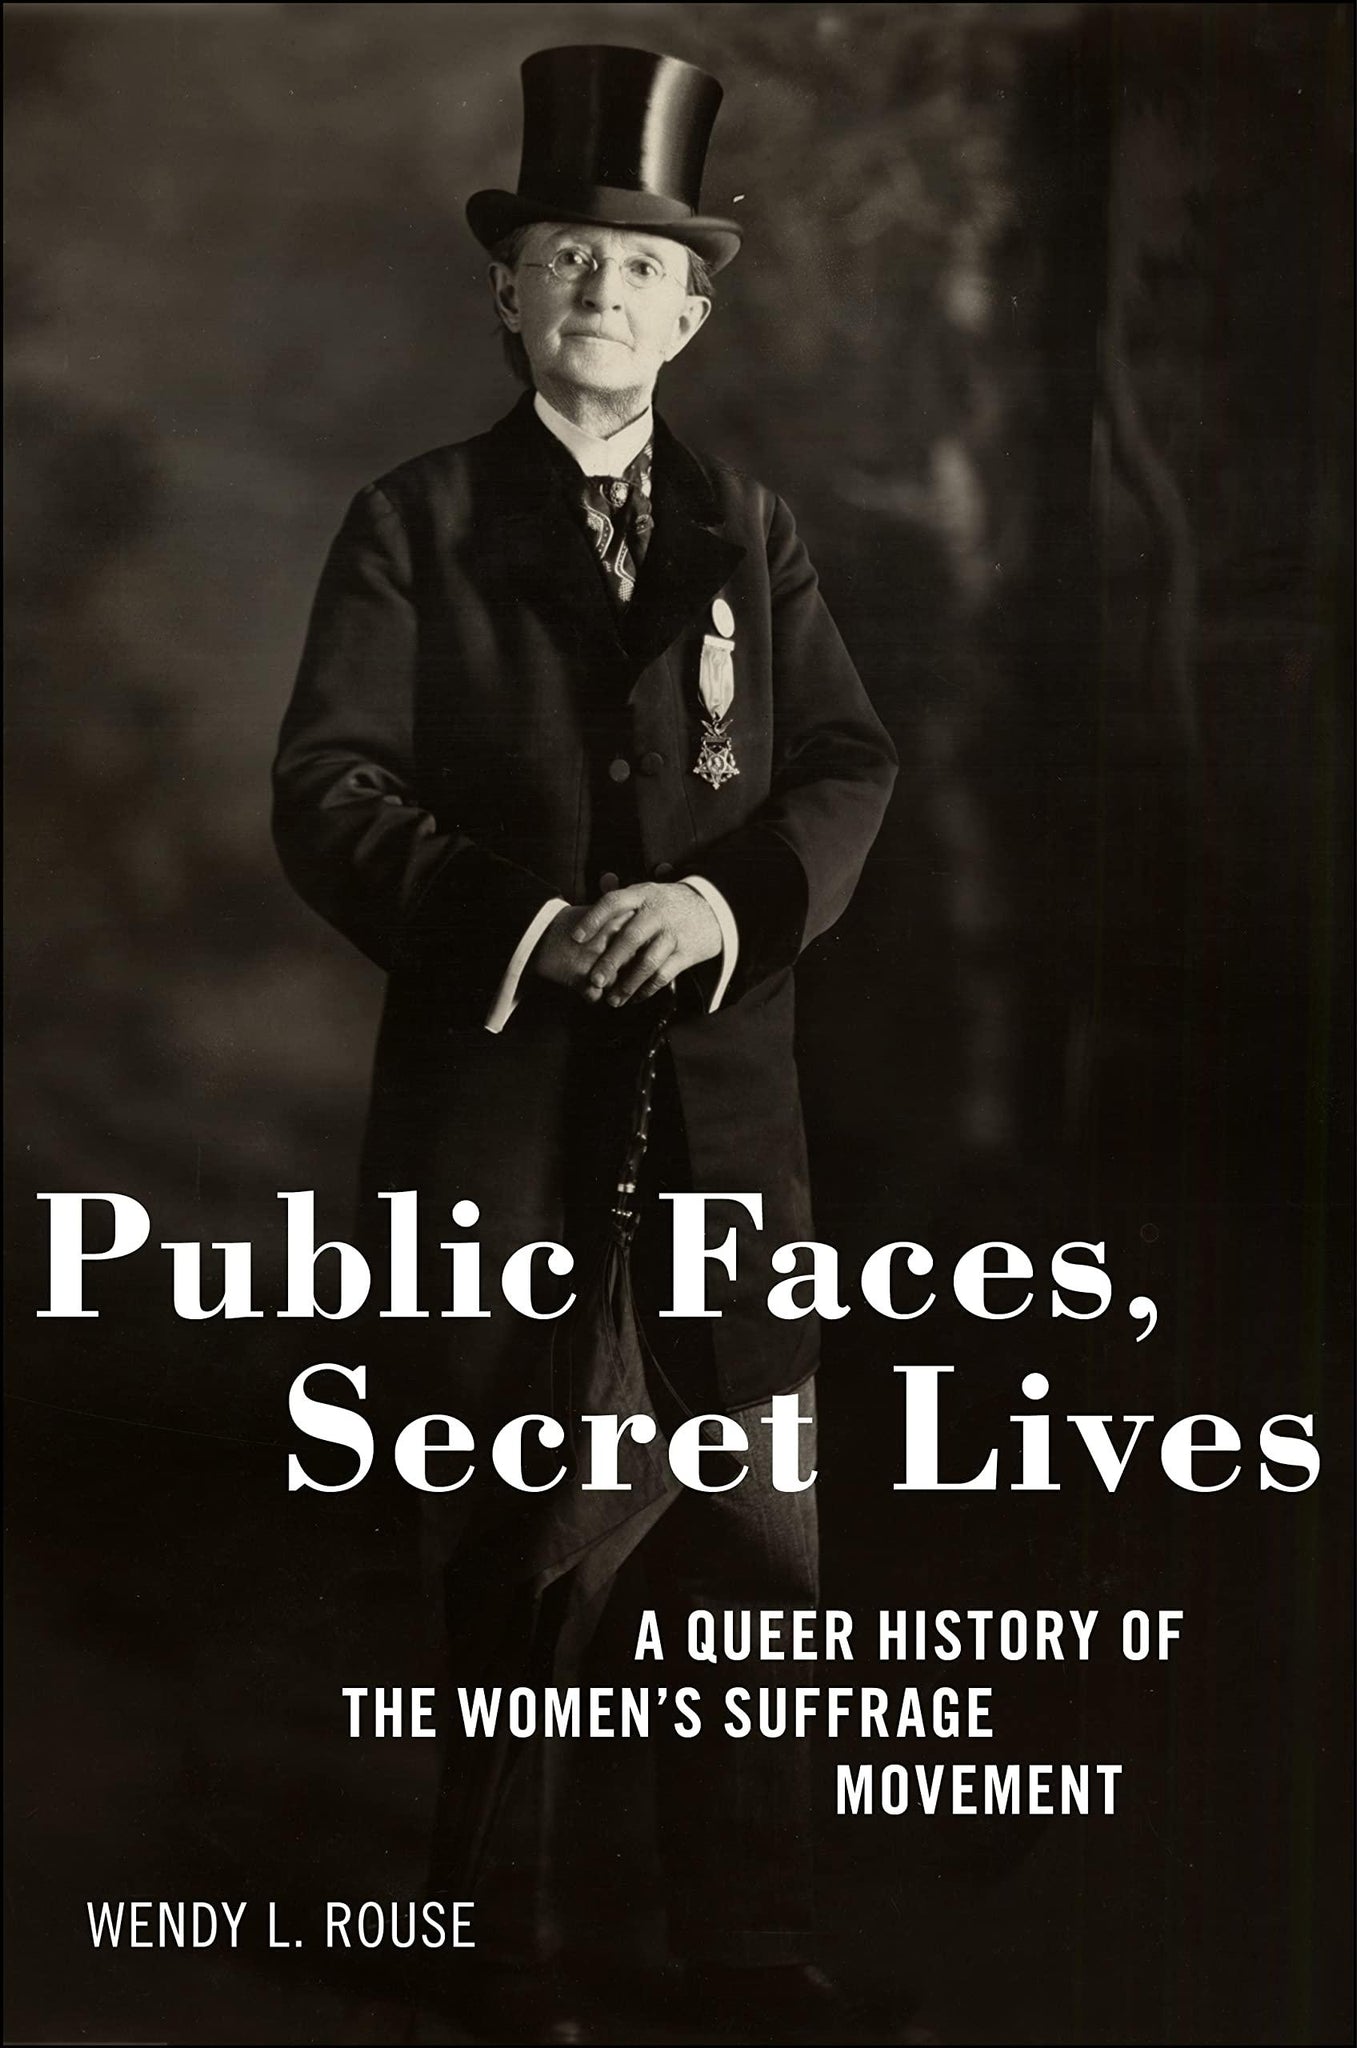 Public Faces, Secret Lives: A Queer History of the Women's Suffrage Movement - ShopQueer.co